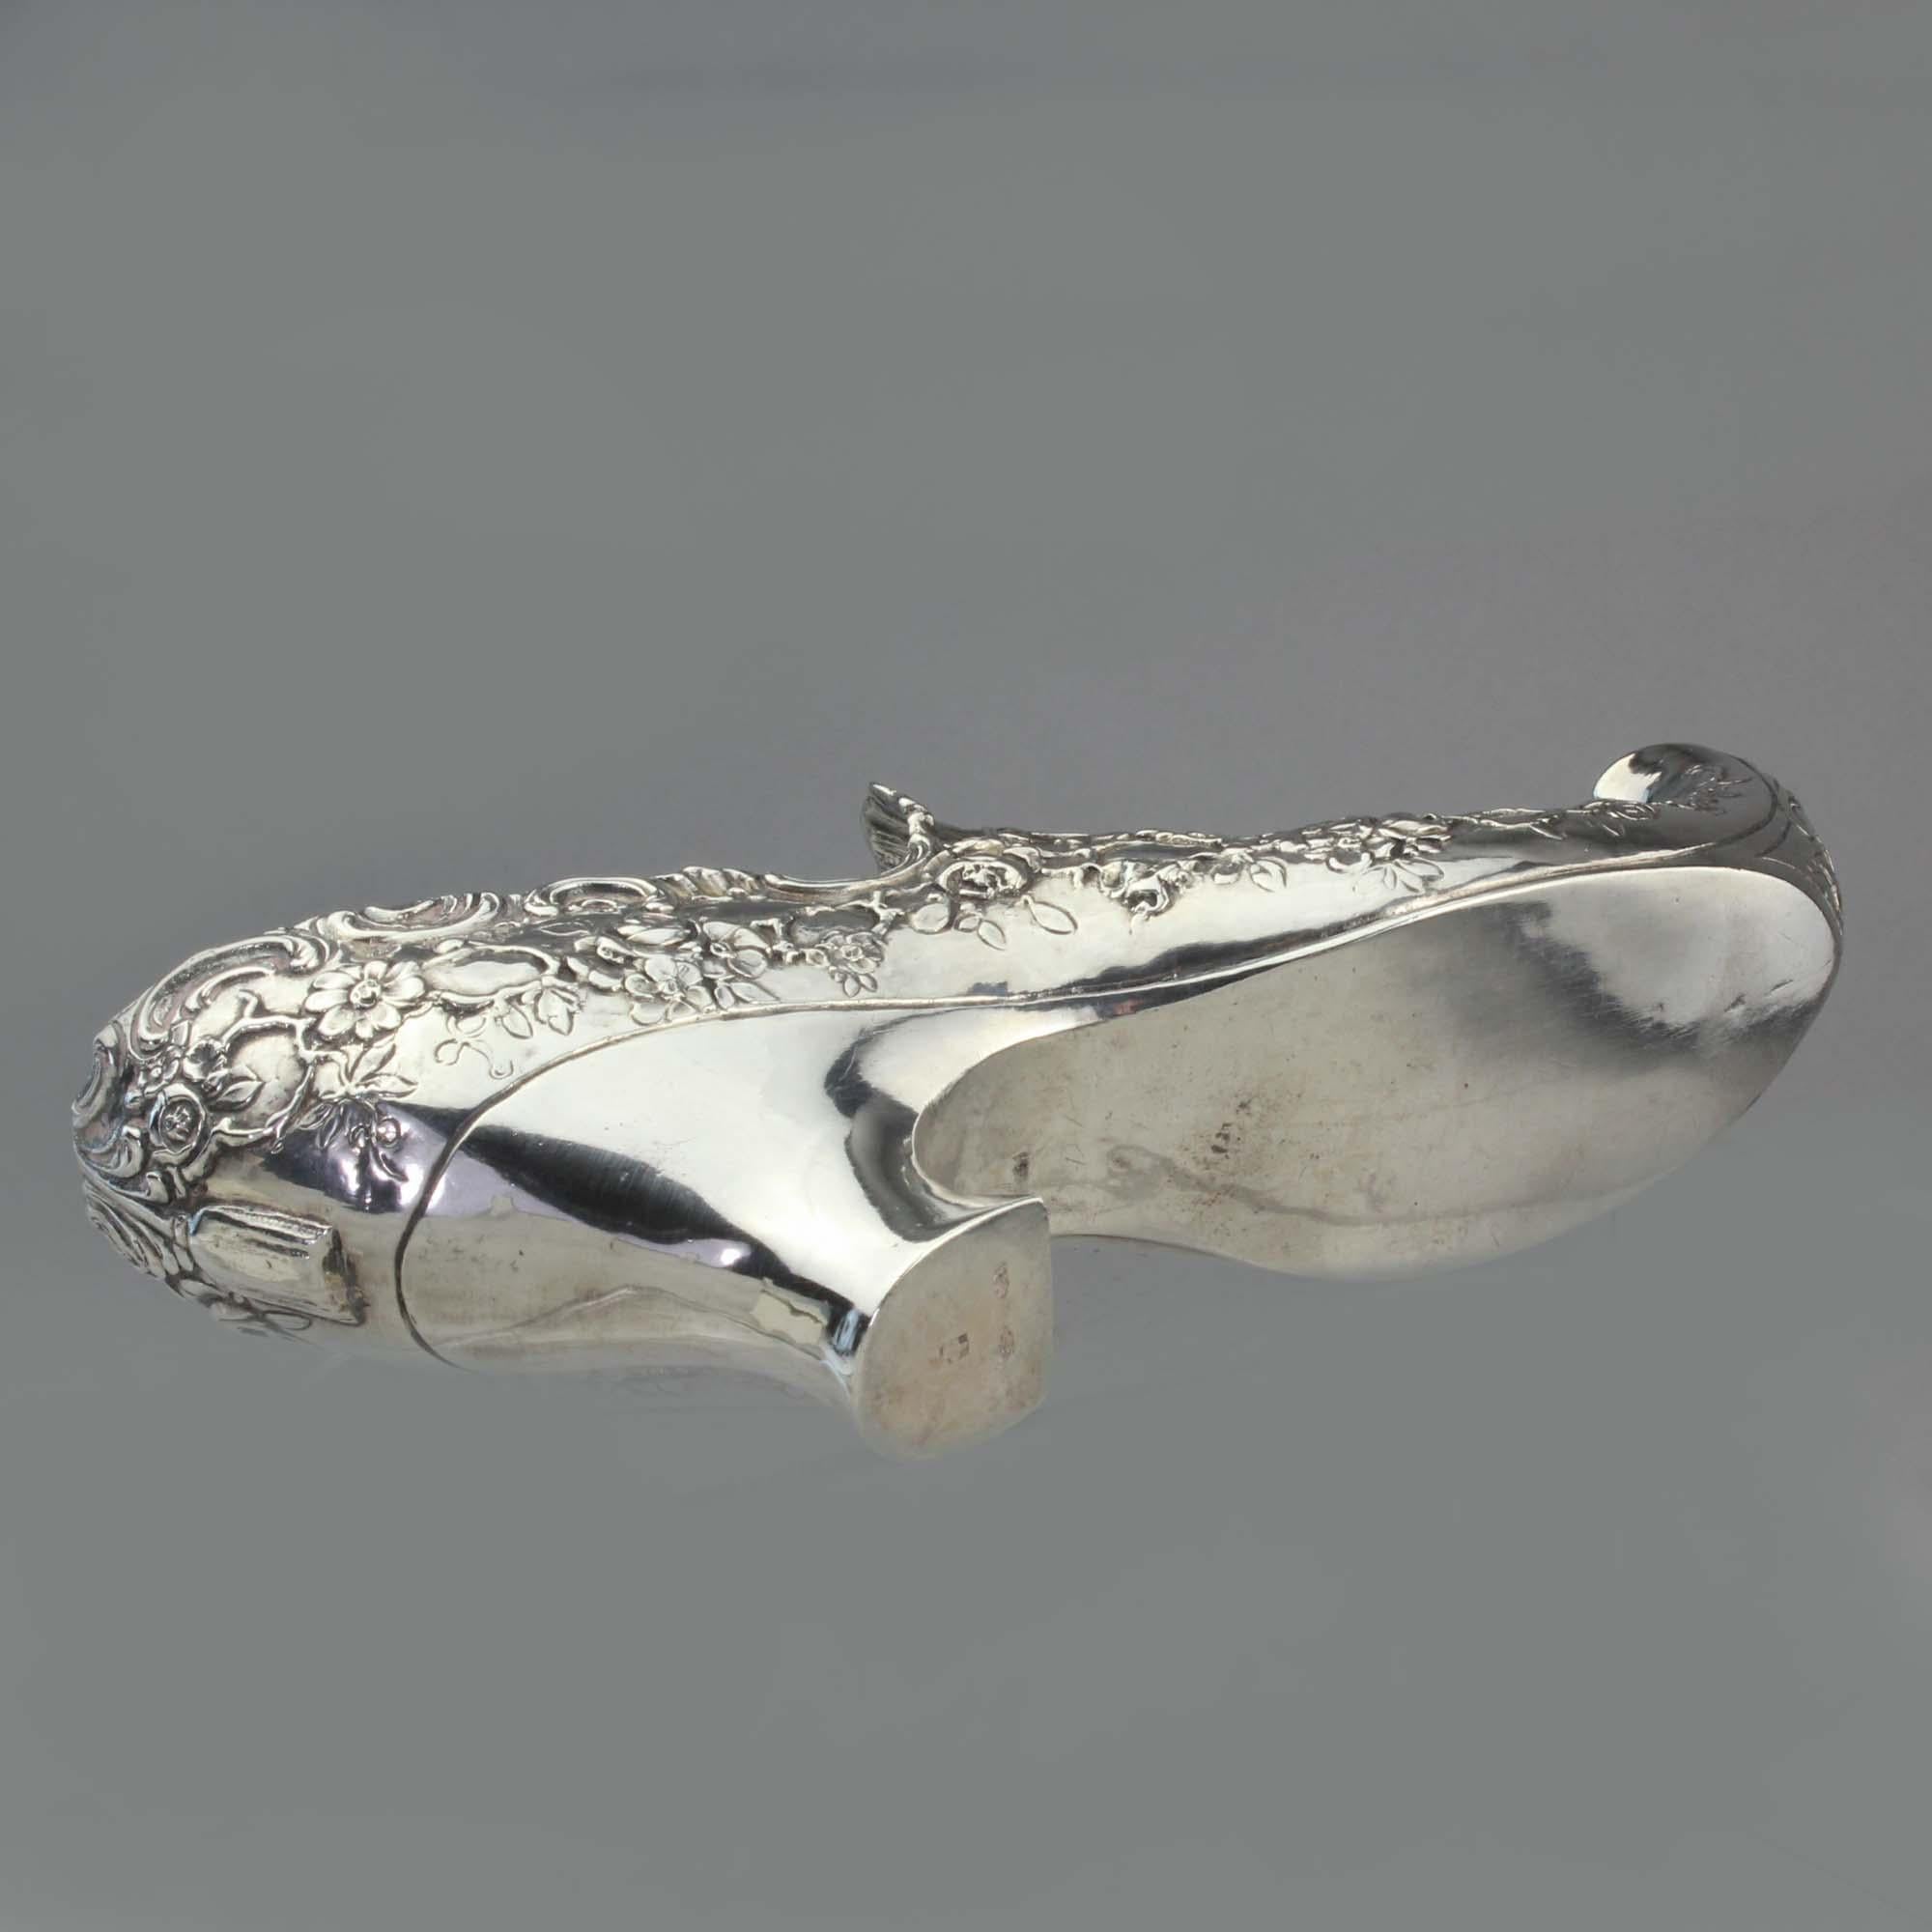 Antique Late 19th Century German 930, Silver Rococo Lady's Shoe with Elf Toe For Sale 5